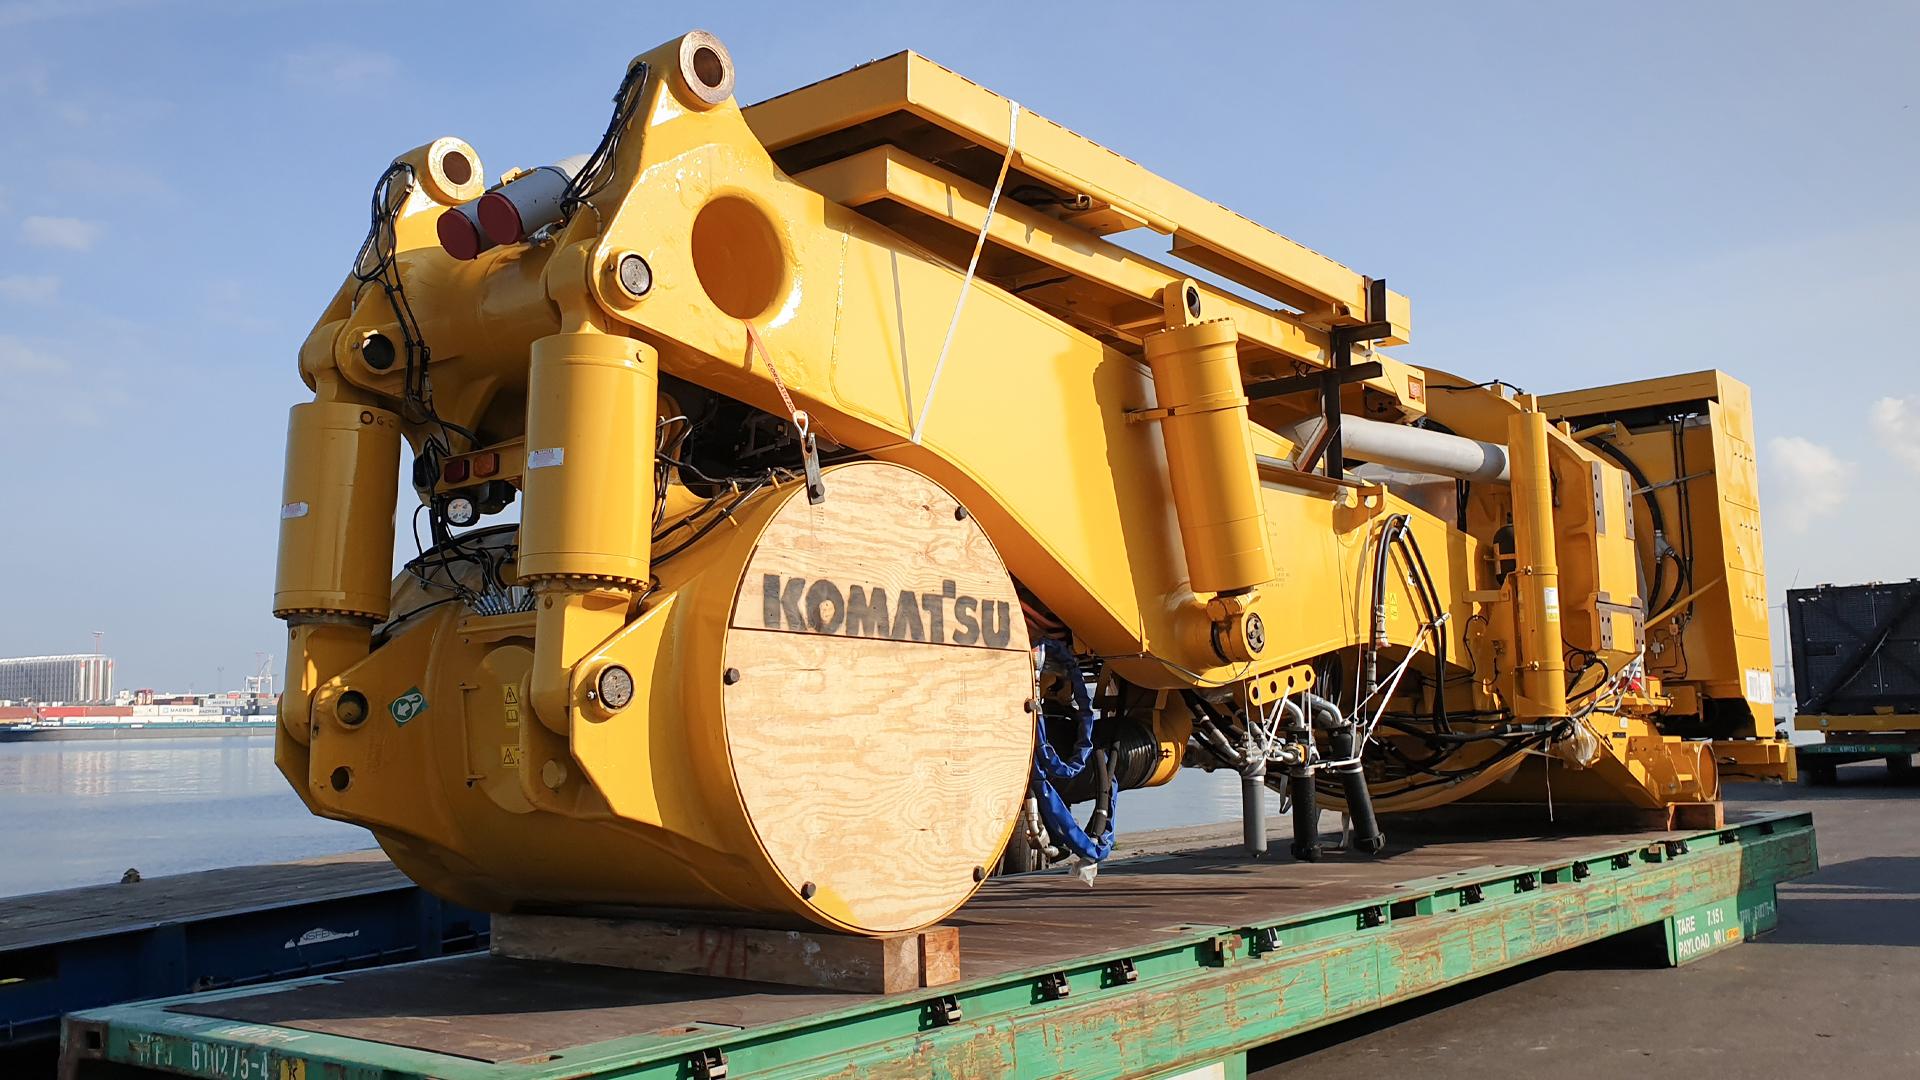 A section of the Komatsu mining truck ready to be taken on board